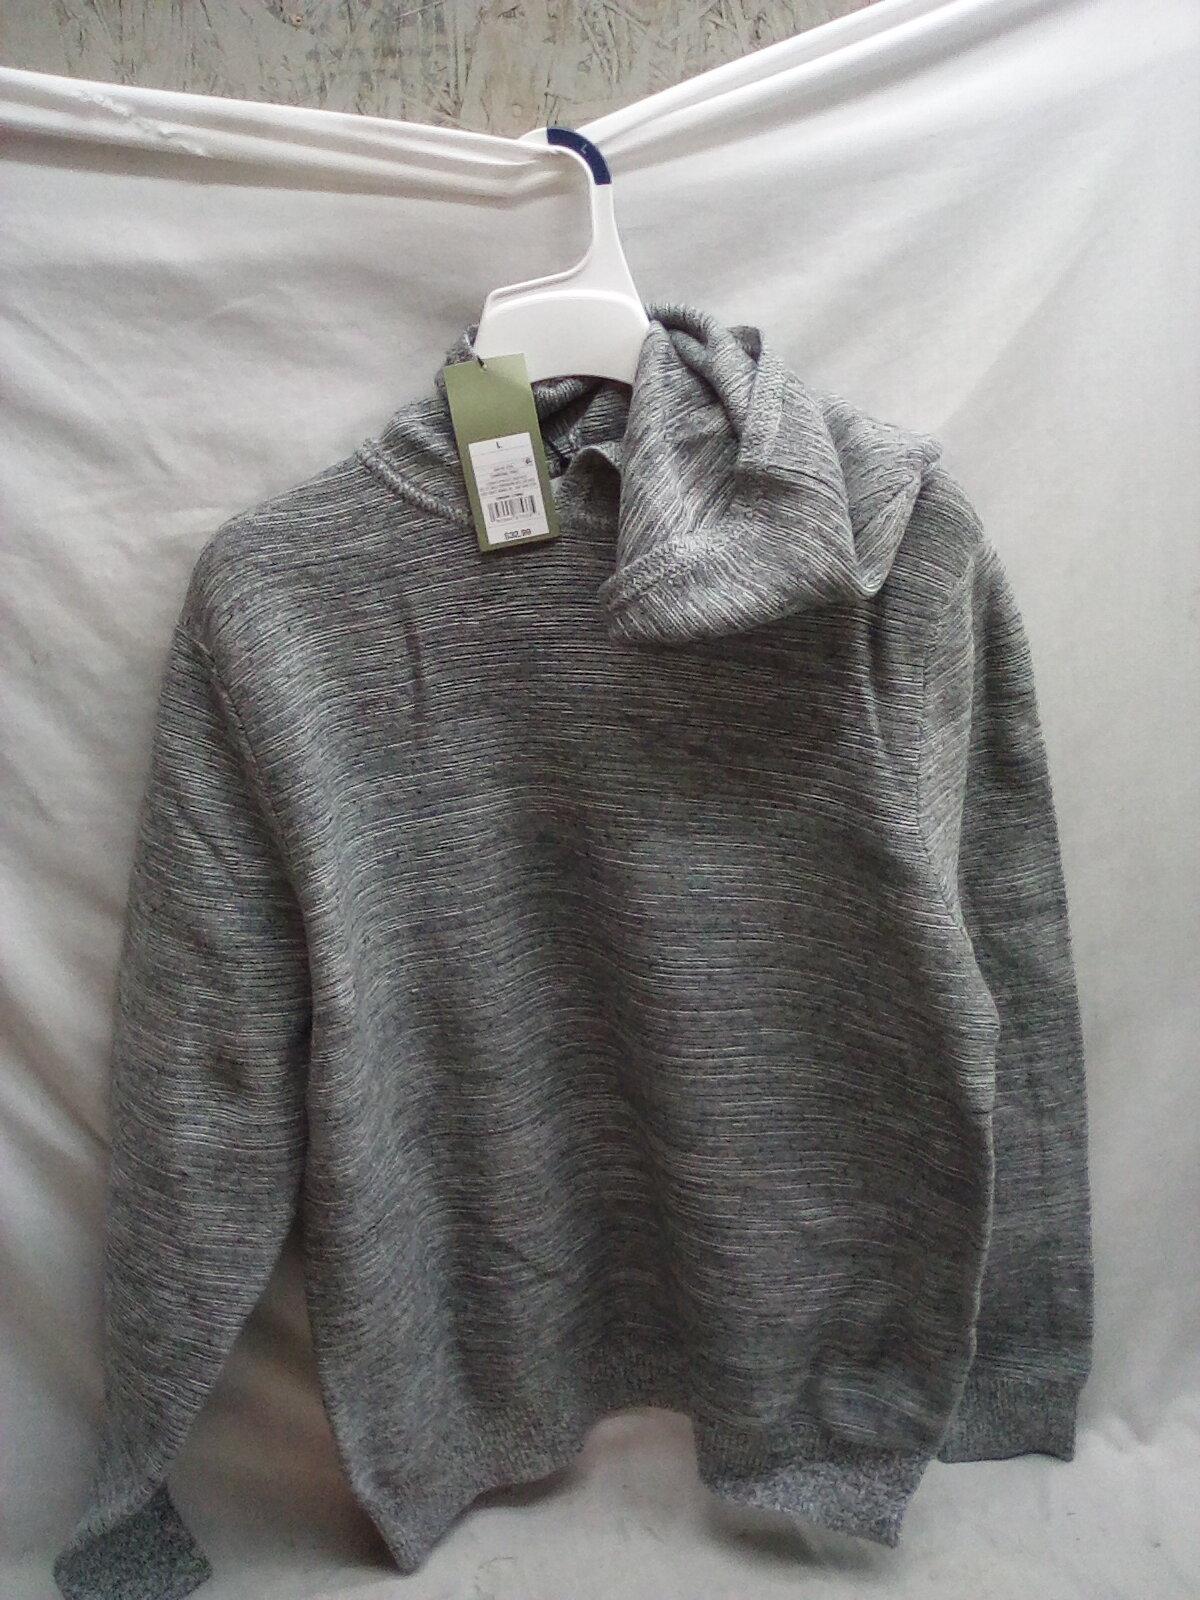 Goodfellow & Co. Hooded Sweatshirt priced tagged at $32.99 from Targ&t